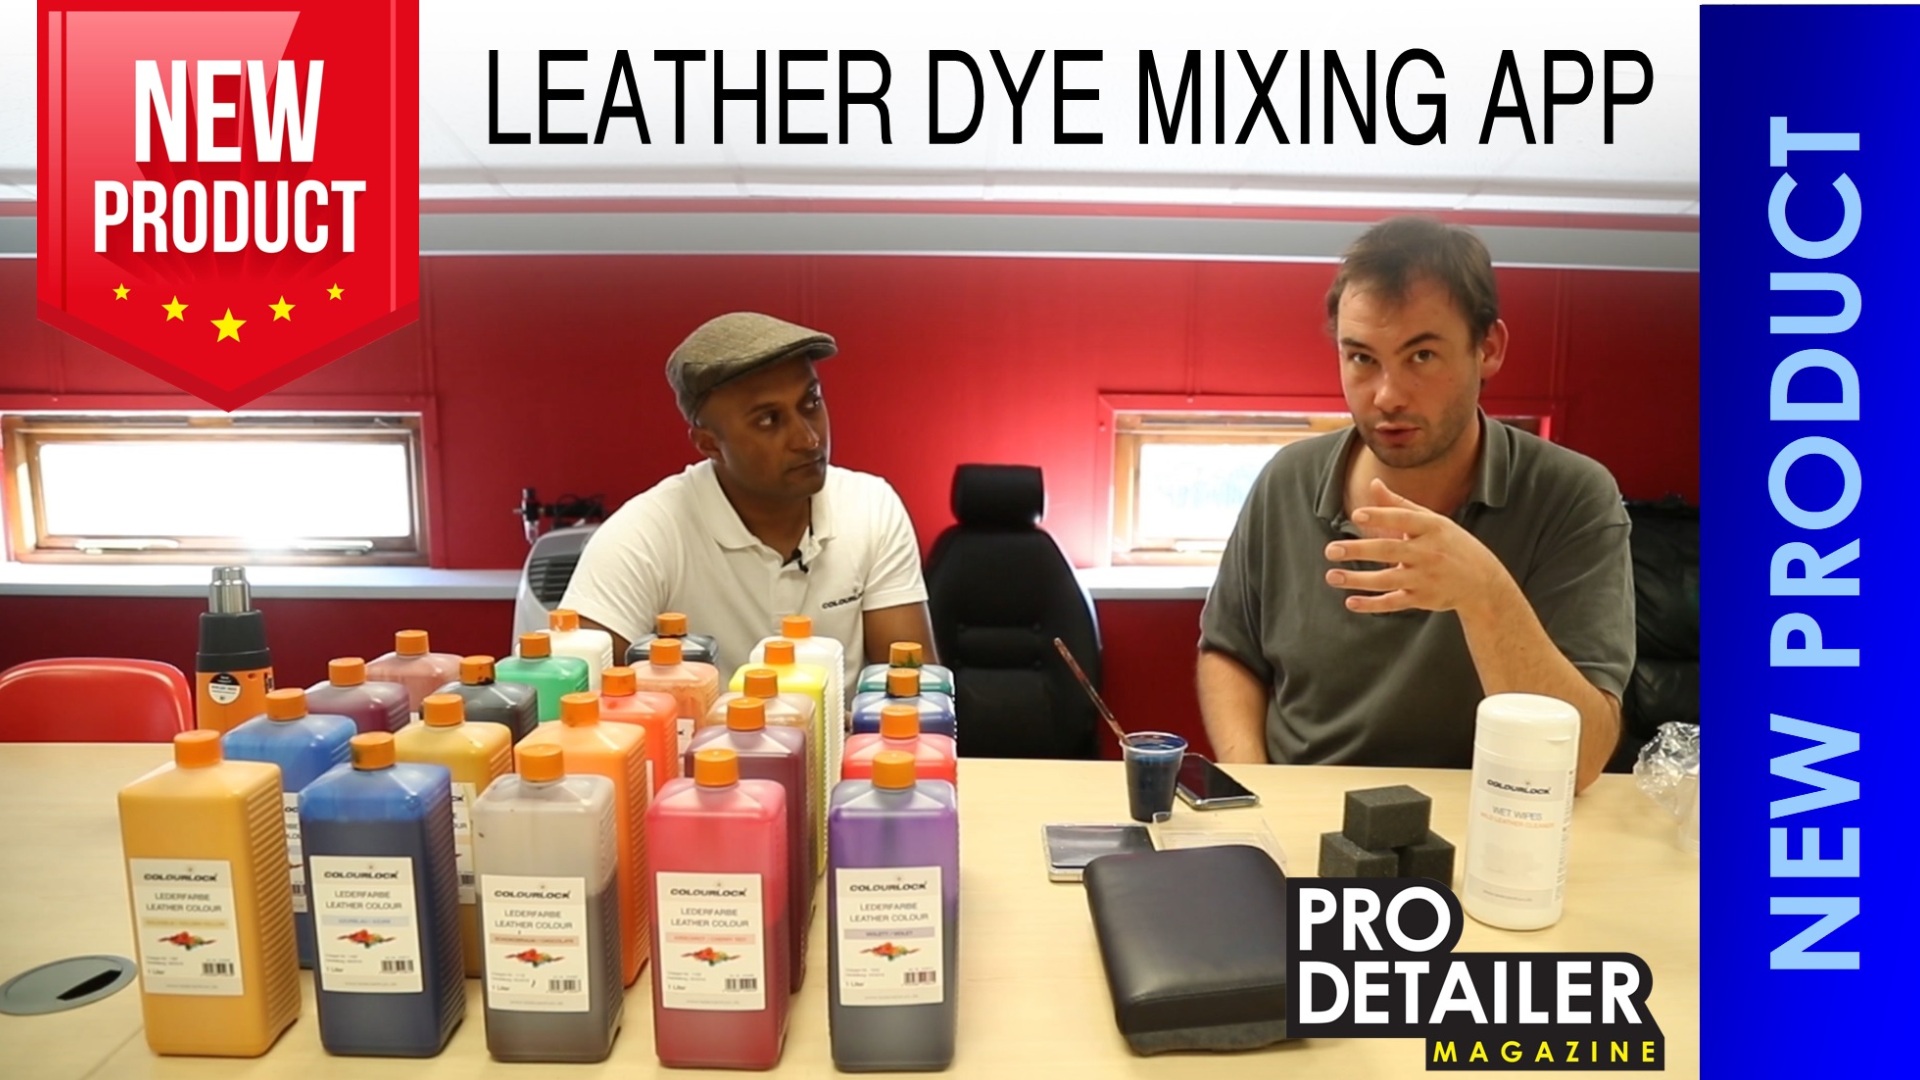 NEW leather dye mixing app from Colourlock - PRO Detailer Magazine